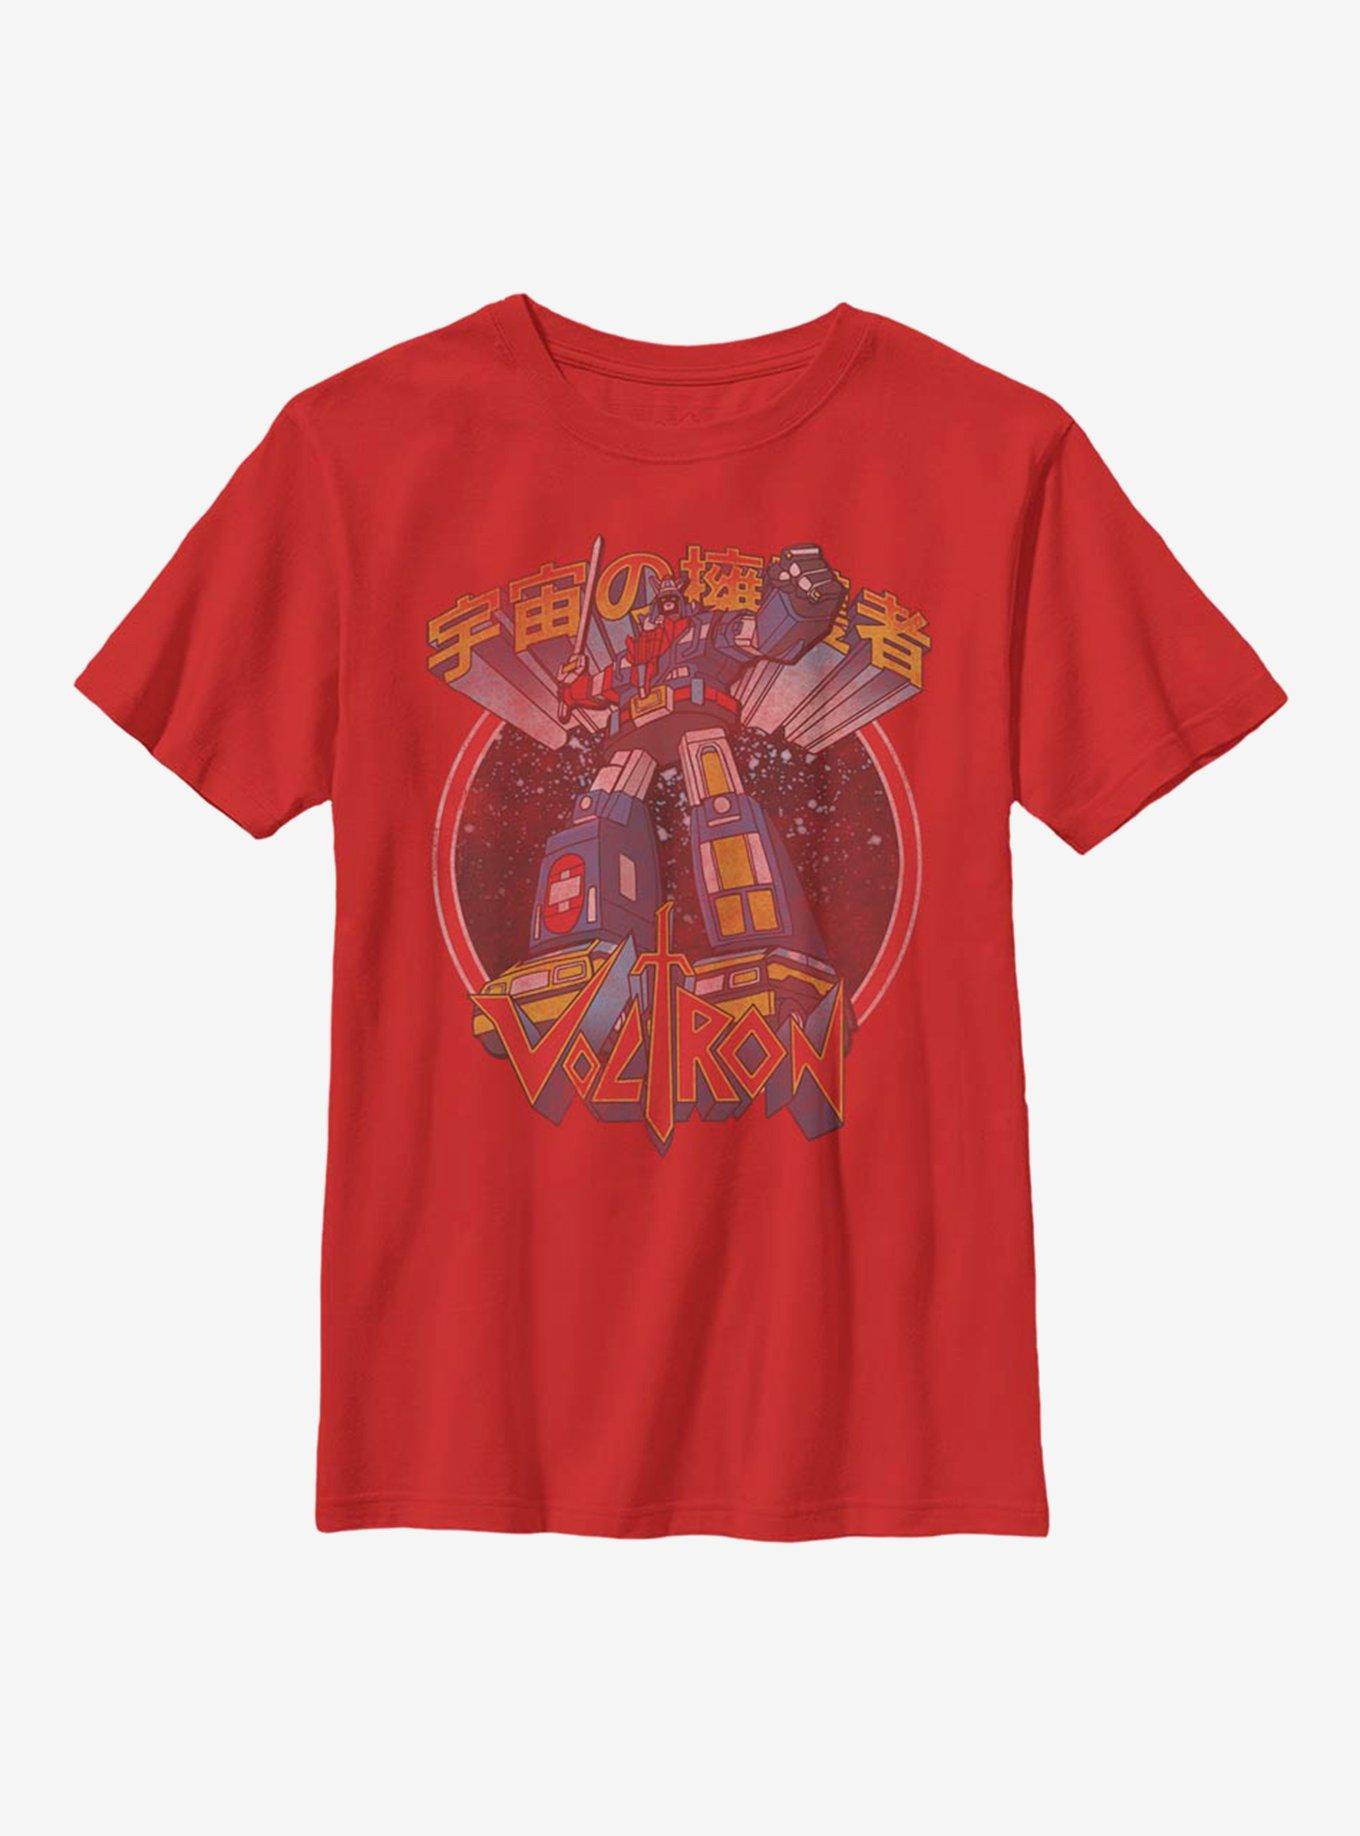 Voltron Japanese Text Youth T-Shirt, RED, hi-res